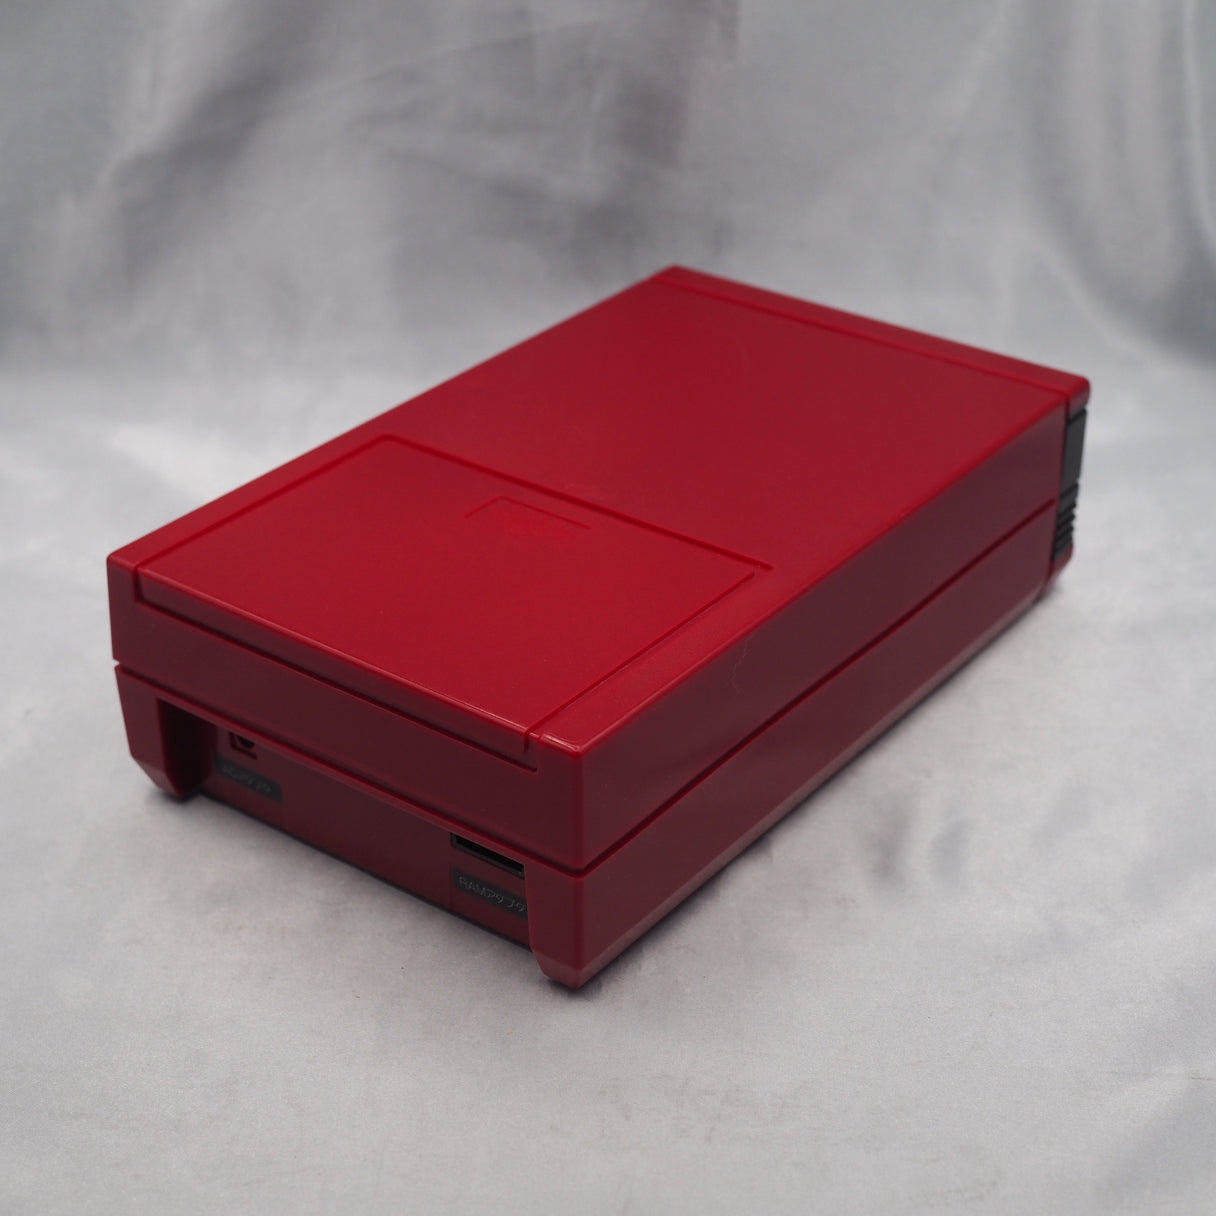 Famicom Disk System [New Rubber Belt Replaced]